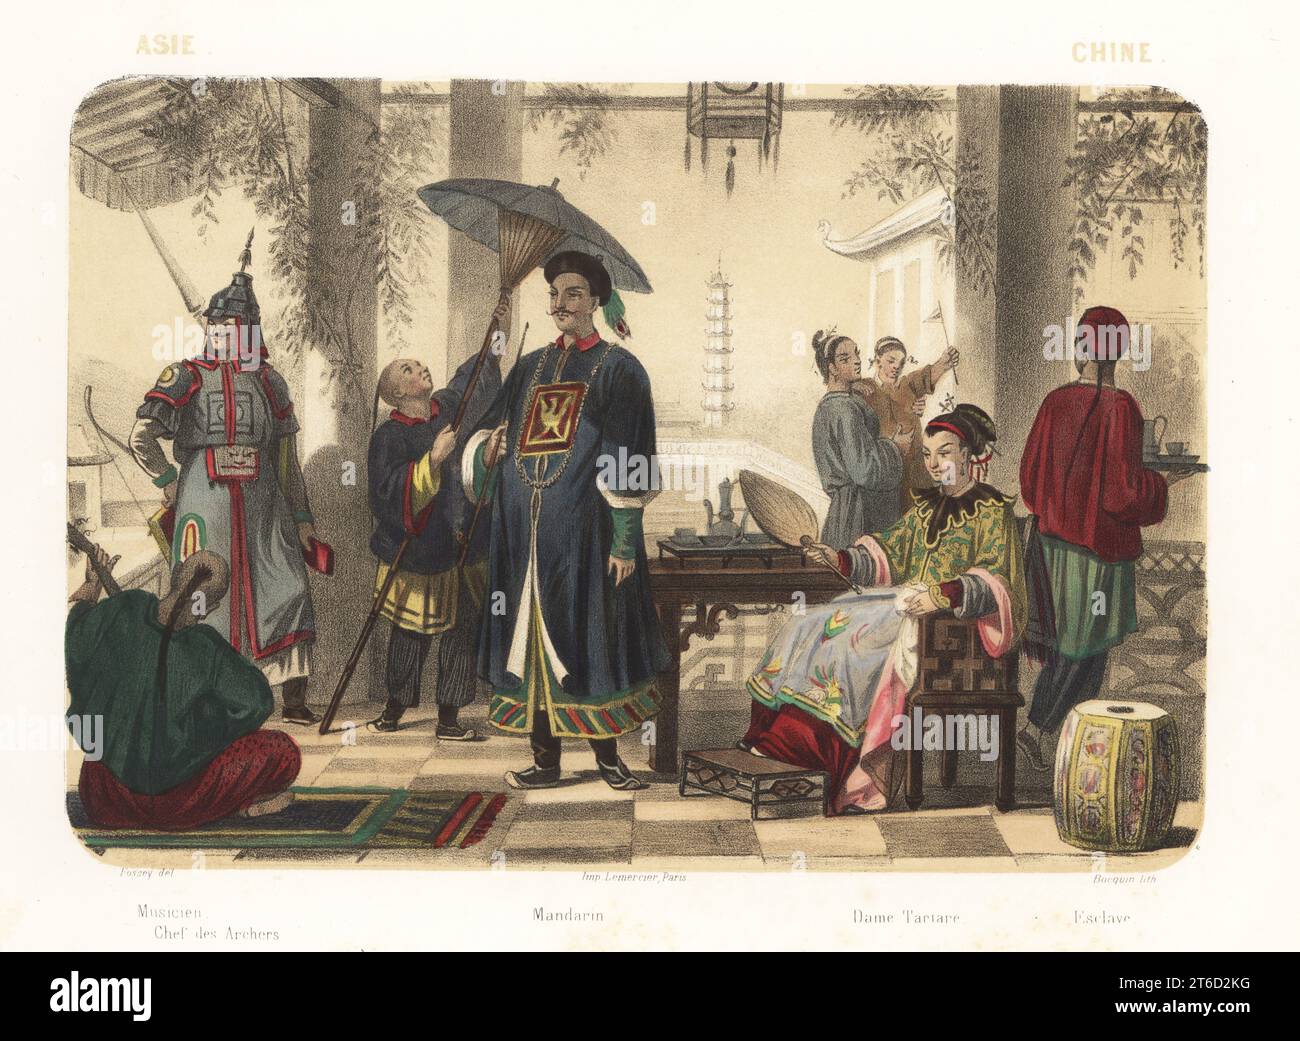 Costumes of China, 1858. Musician playing a pipa or Chinese lute, Chief Archer in helmet and robes, Mandarin bureaucrat with rank badge and a servant holding a parasol, Tatar Lady seated on a chair holding a fan, slave with long pigtail holding a tray of tea. Pagoda and palace in the background. Musicien, chef des archers, Mandarin, Dame Tartare, esclave. Handcoloured and sepia-tinted lithograph by Jean-Adolphe Bocquin after an illustration by Felix Fossey from Elisabeth Muller (pseudonym of Leonie Bedelet)s Le Monde en Estampes, The World in Prints, Amadee Bedelet, Paris, 1858. Stock Photo